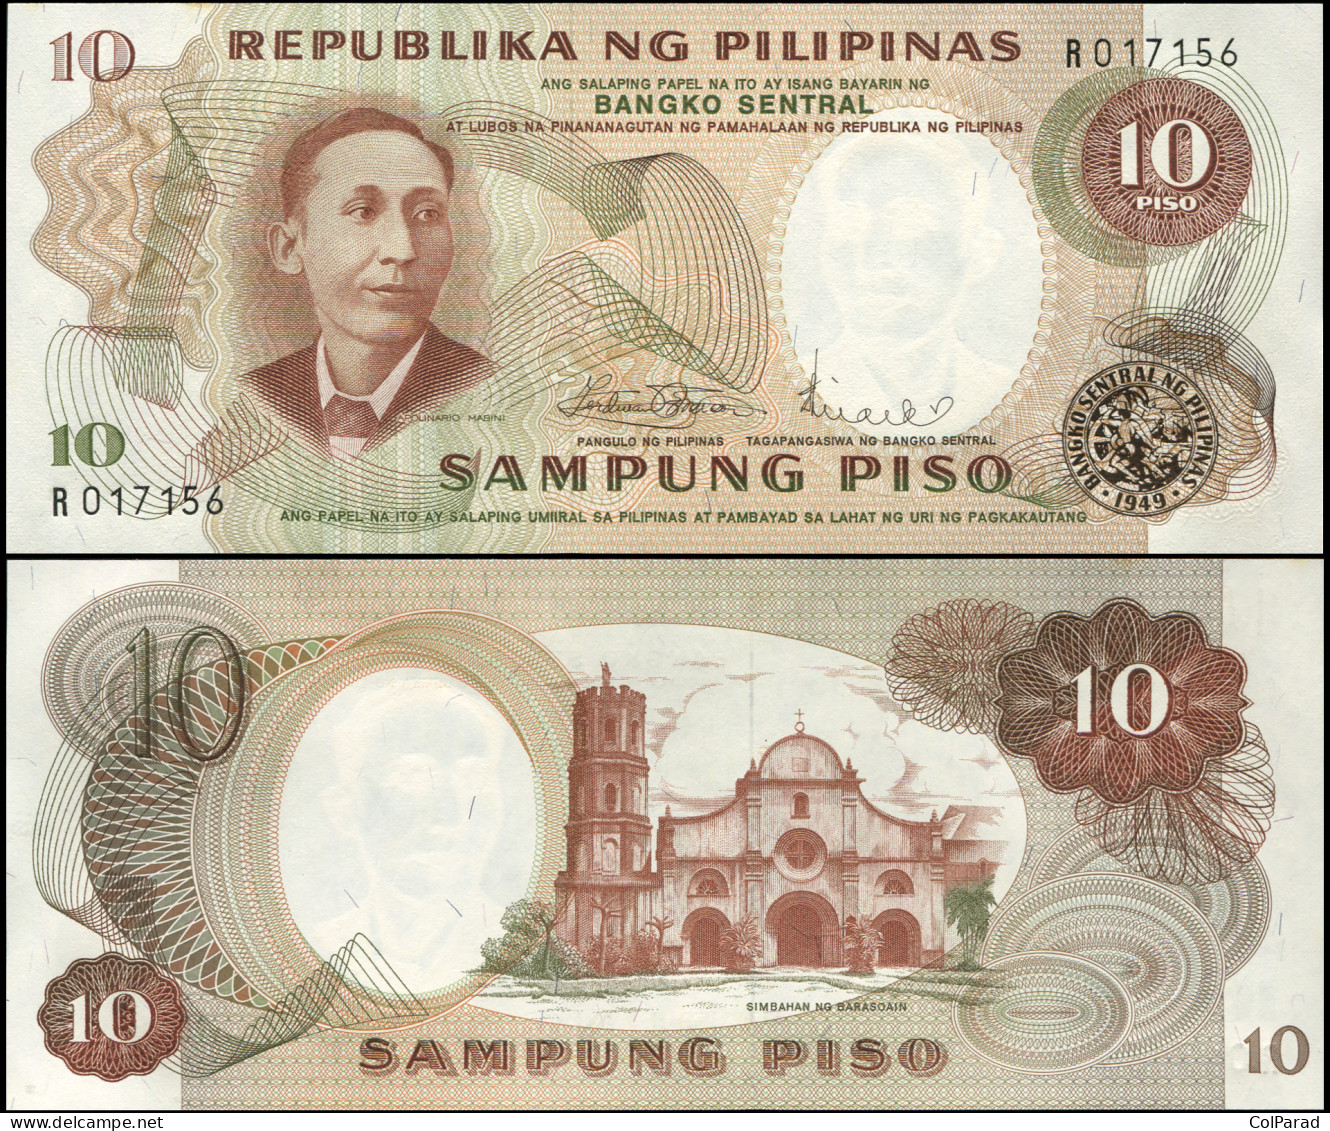 PHILIPPINES 10 PISO - ND (1970) - Paper Unc - P.144b Banknote - Filipinas